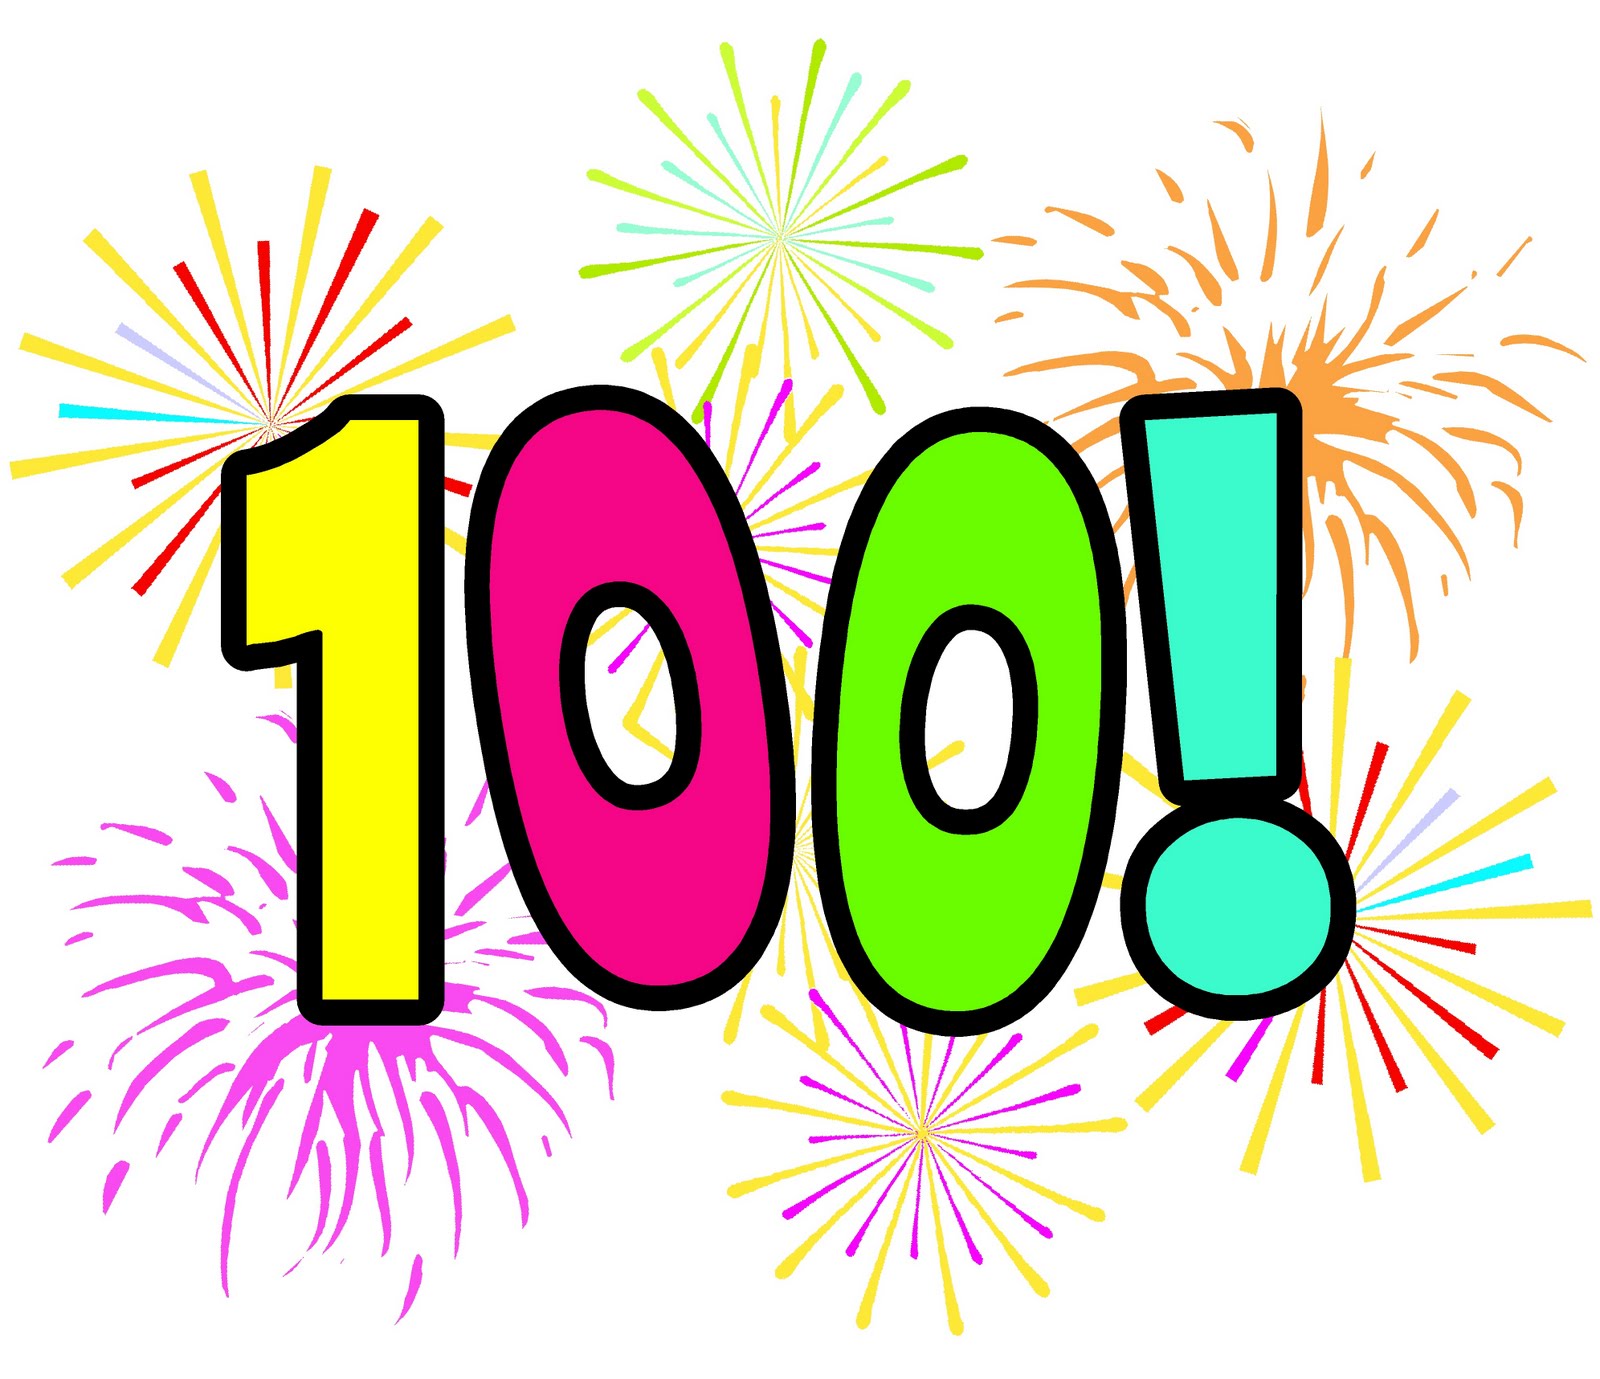 100 clipart - Clipground